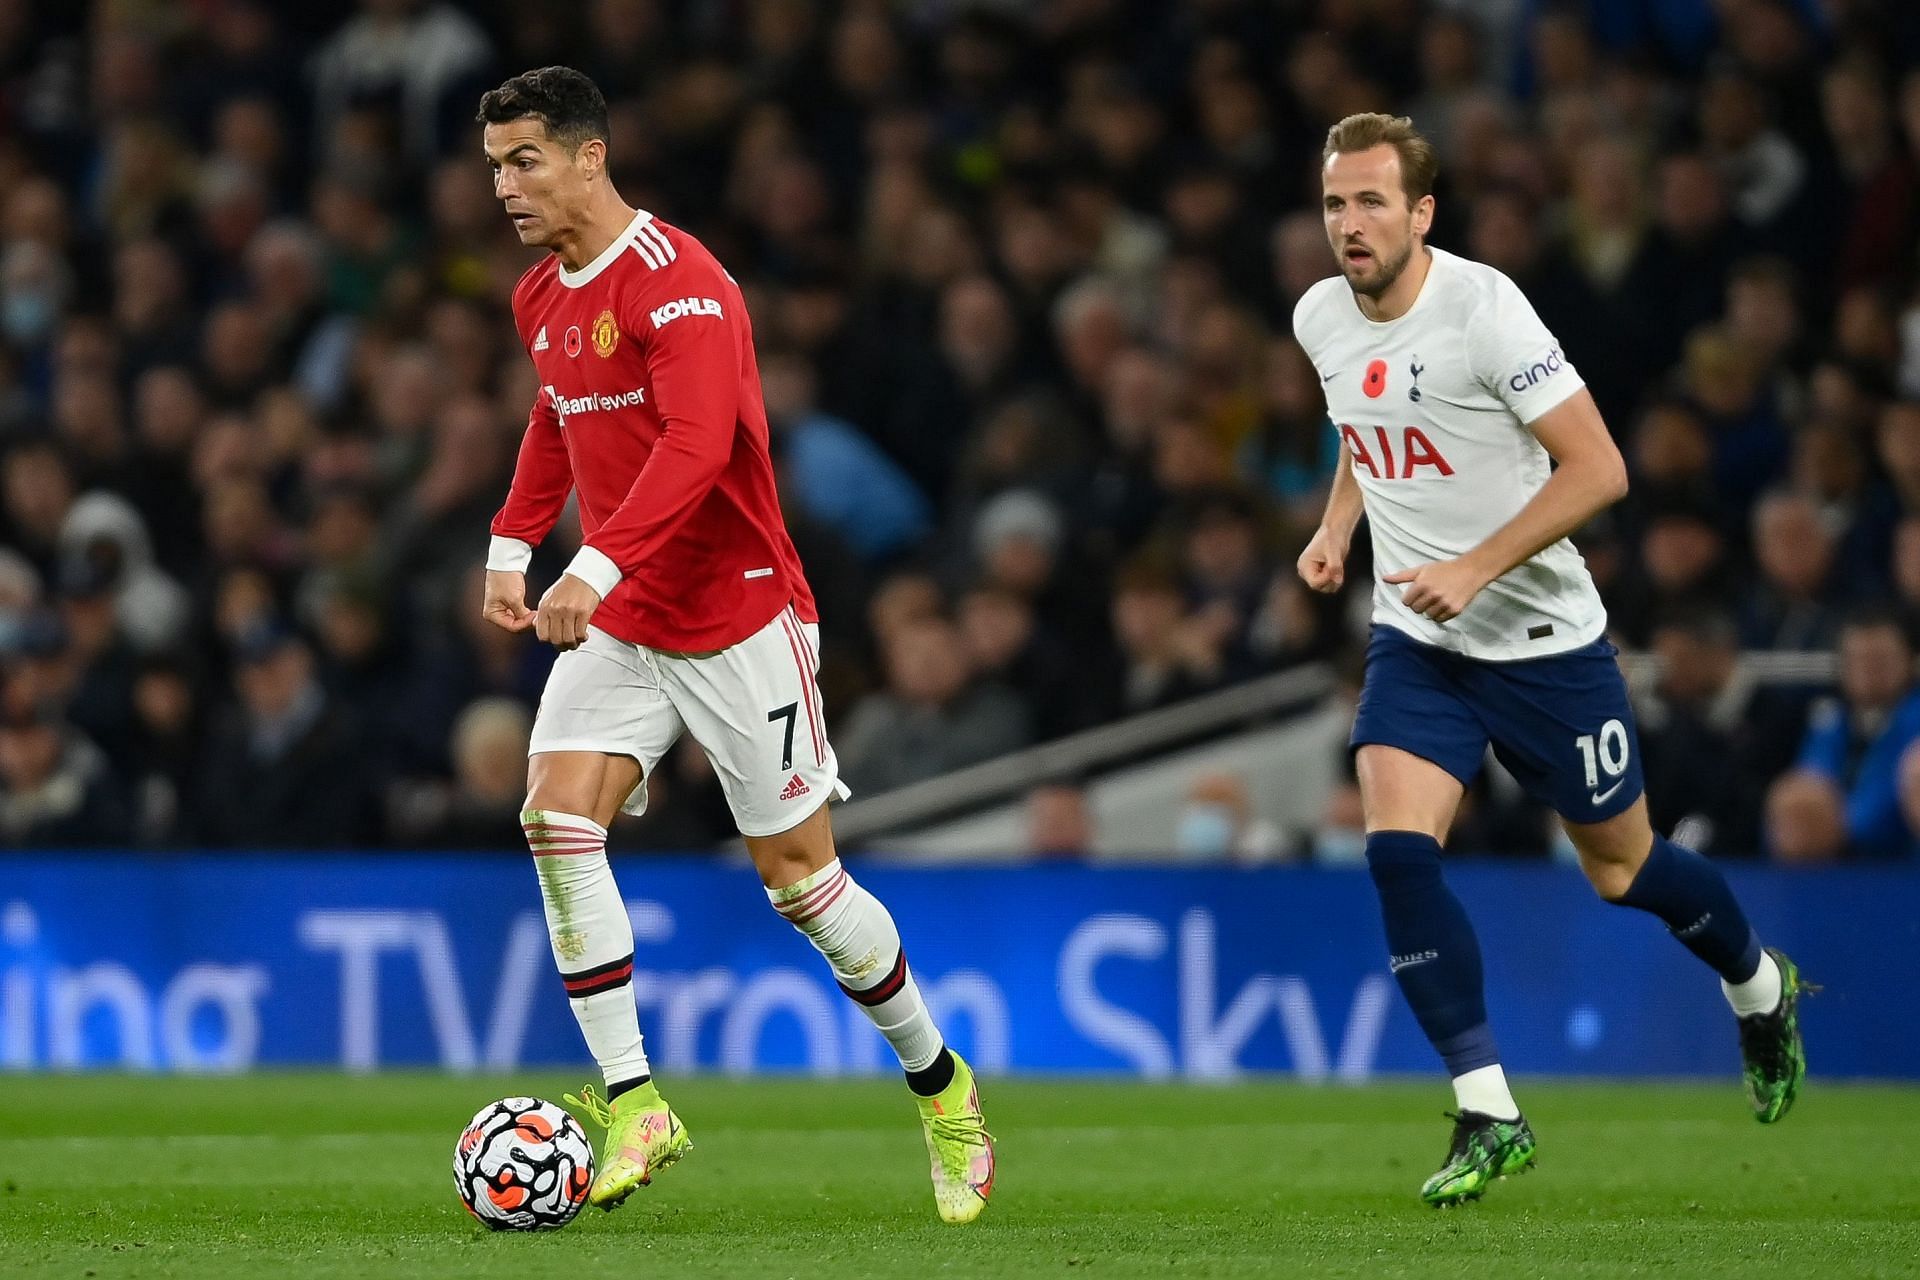 Harry Kane and Crstiano Ronaldo in action during a Premier League game last season